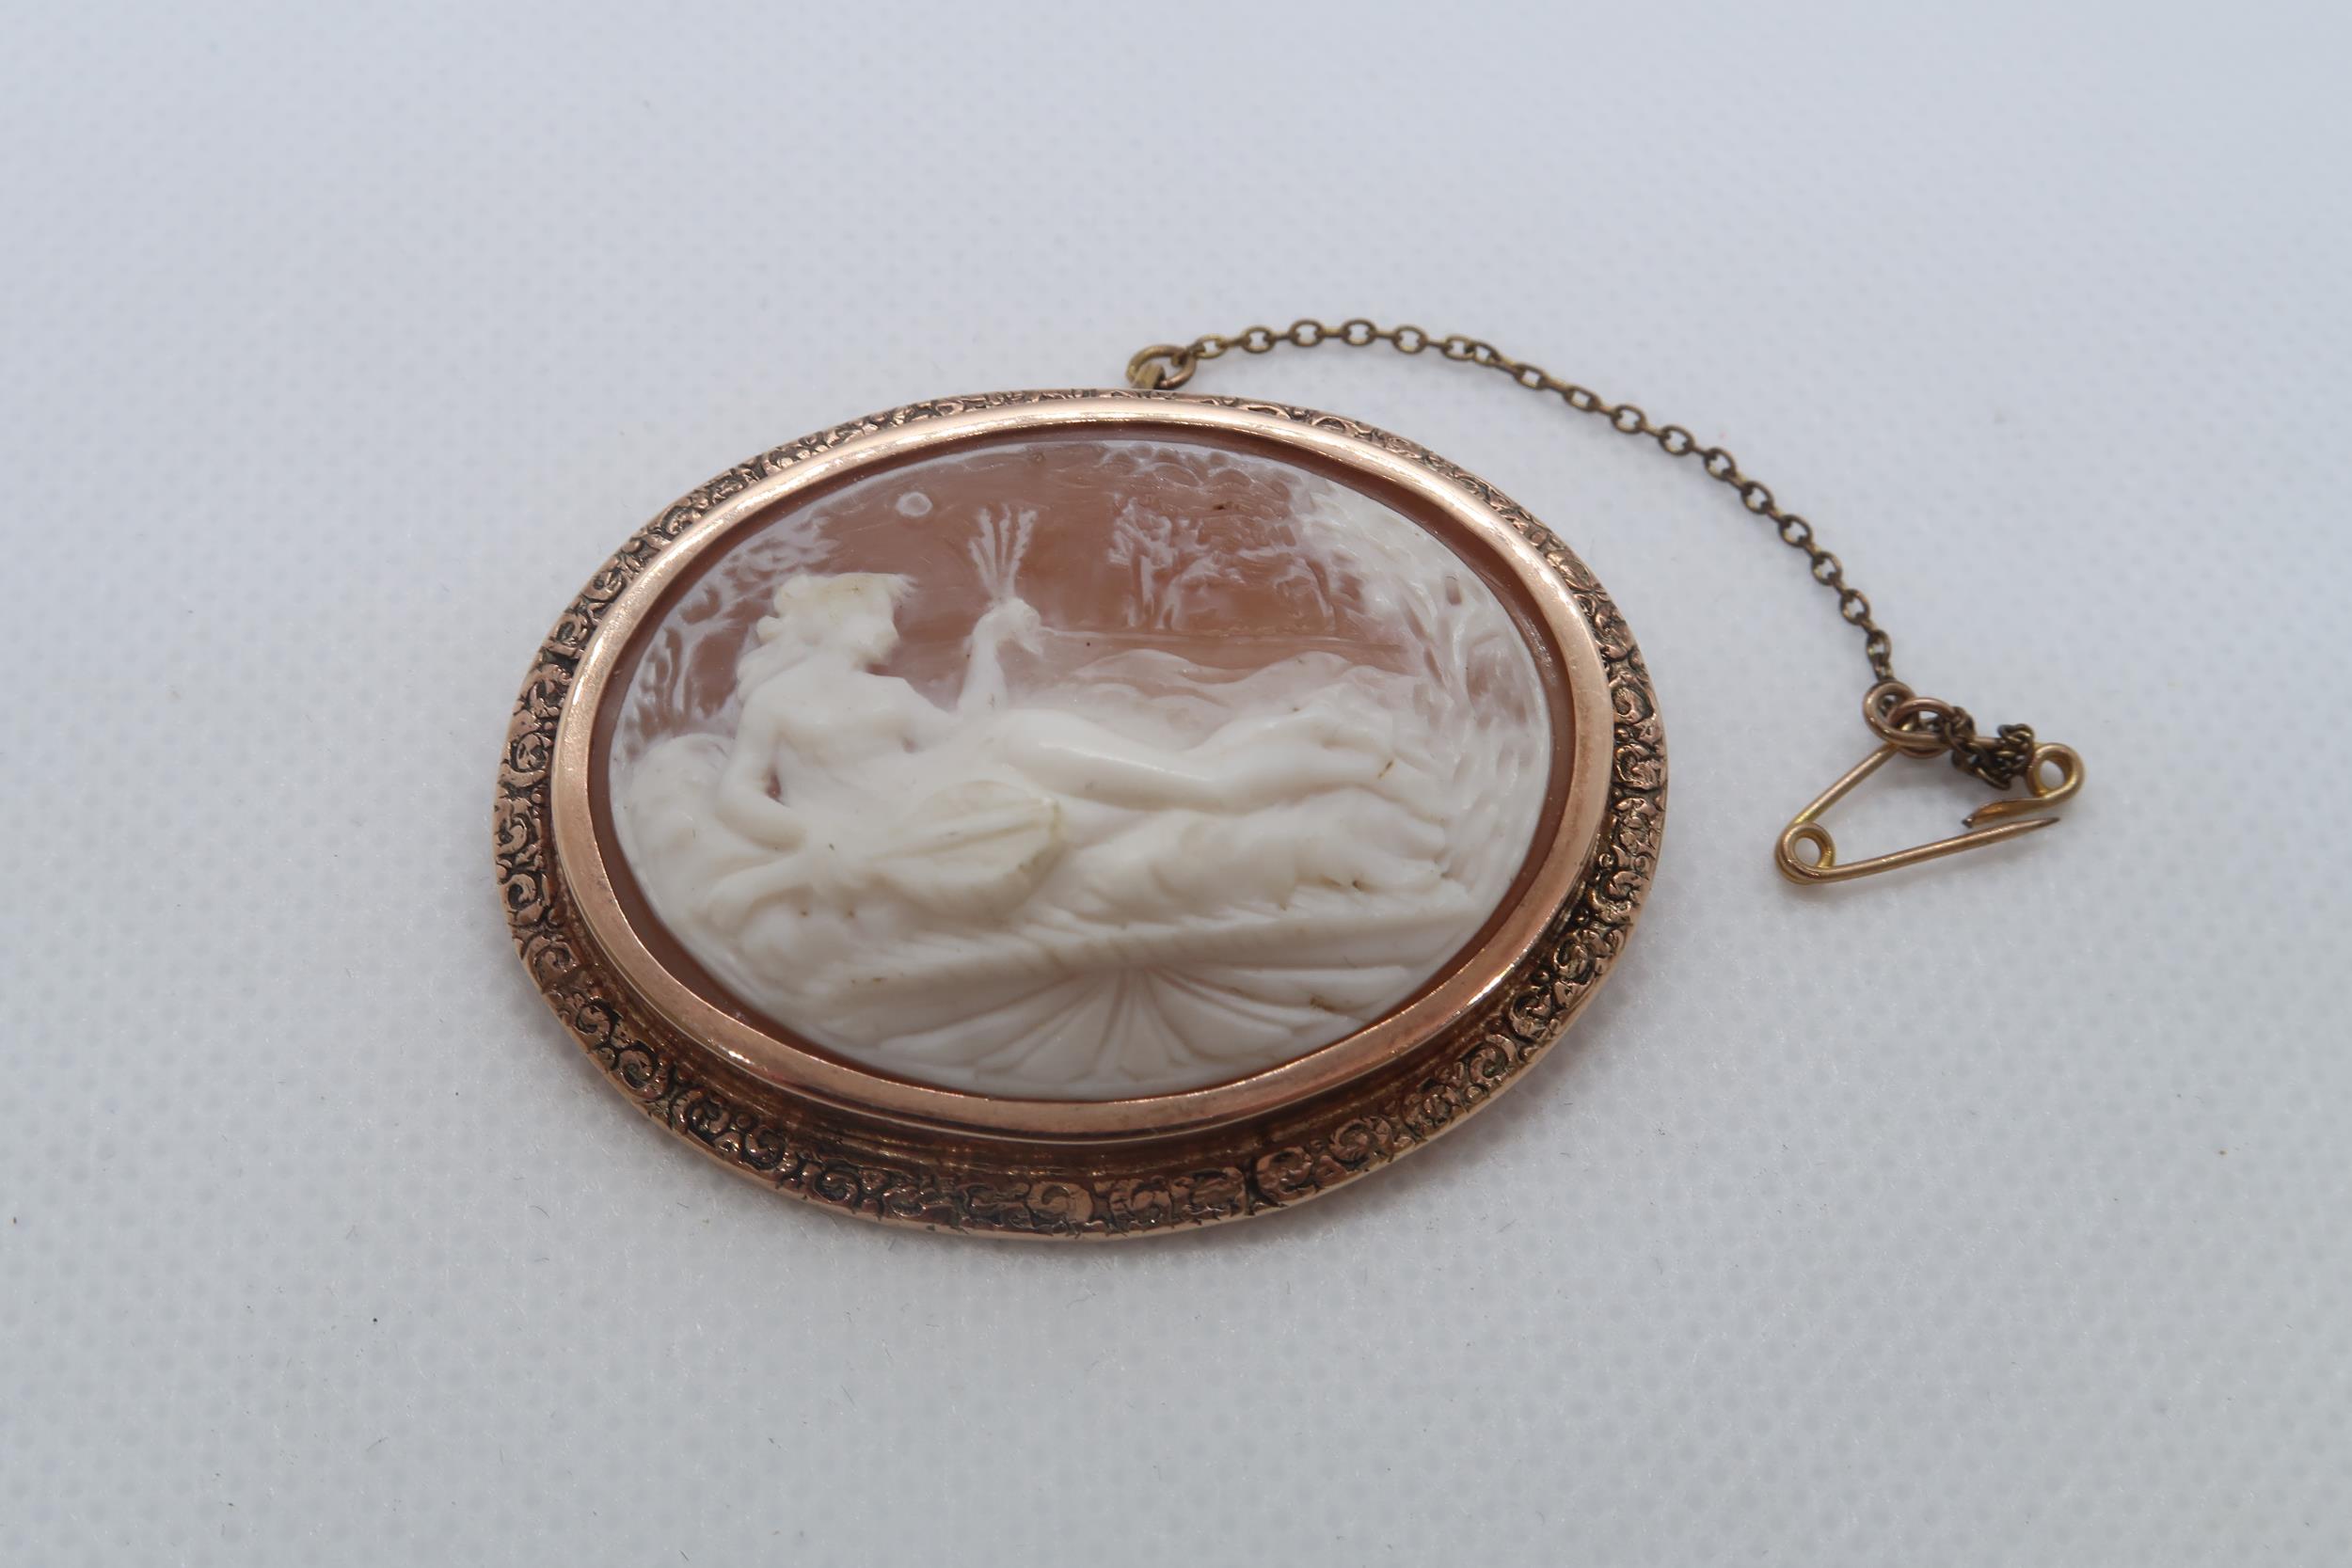 A 9ct rose gold (hallmarked) cameo brooch - 4.5cm x 4cm - approx weight 16.1 grams